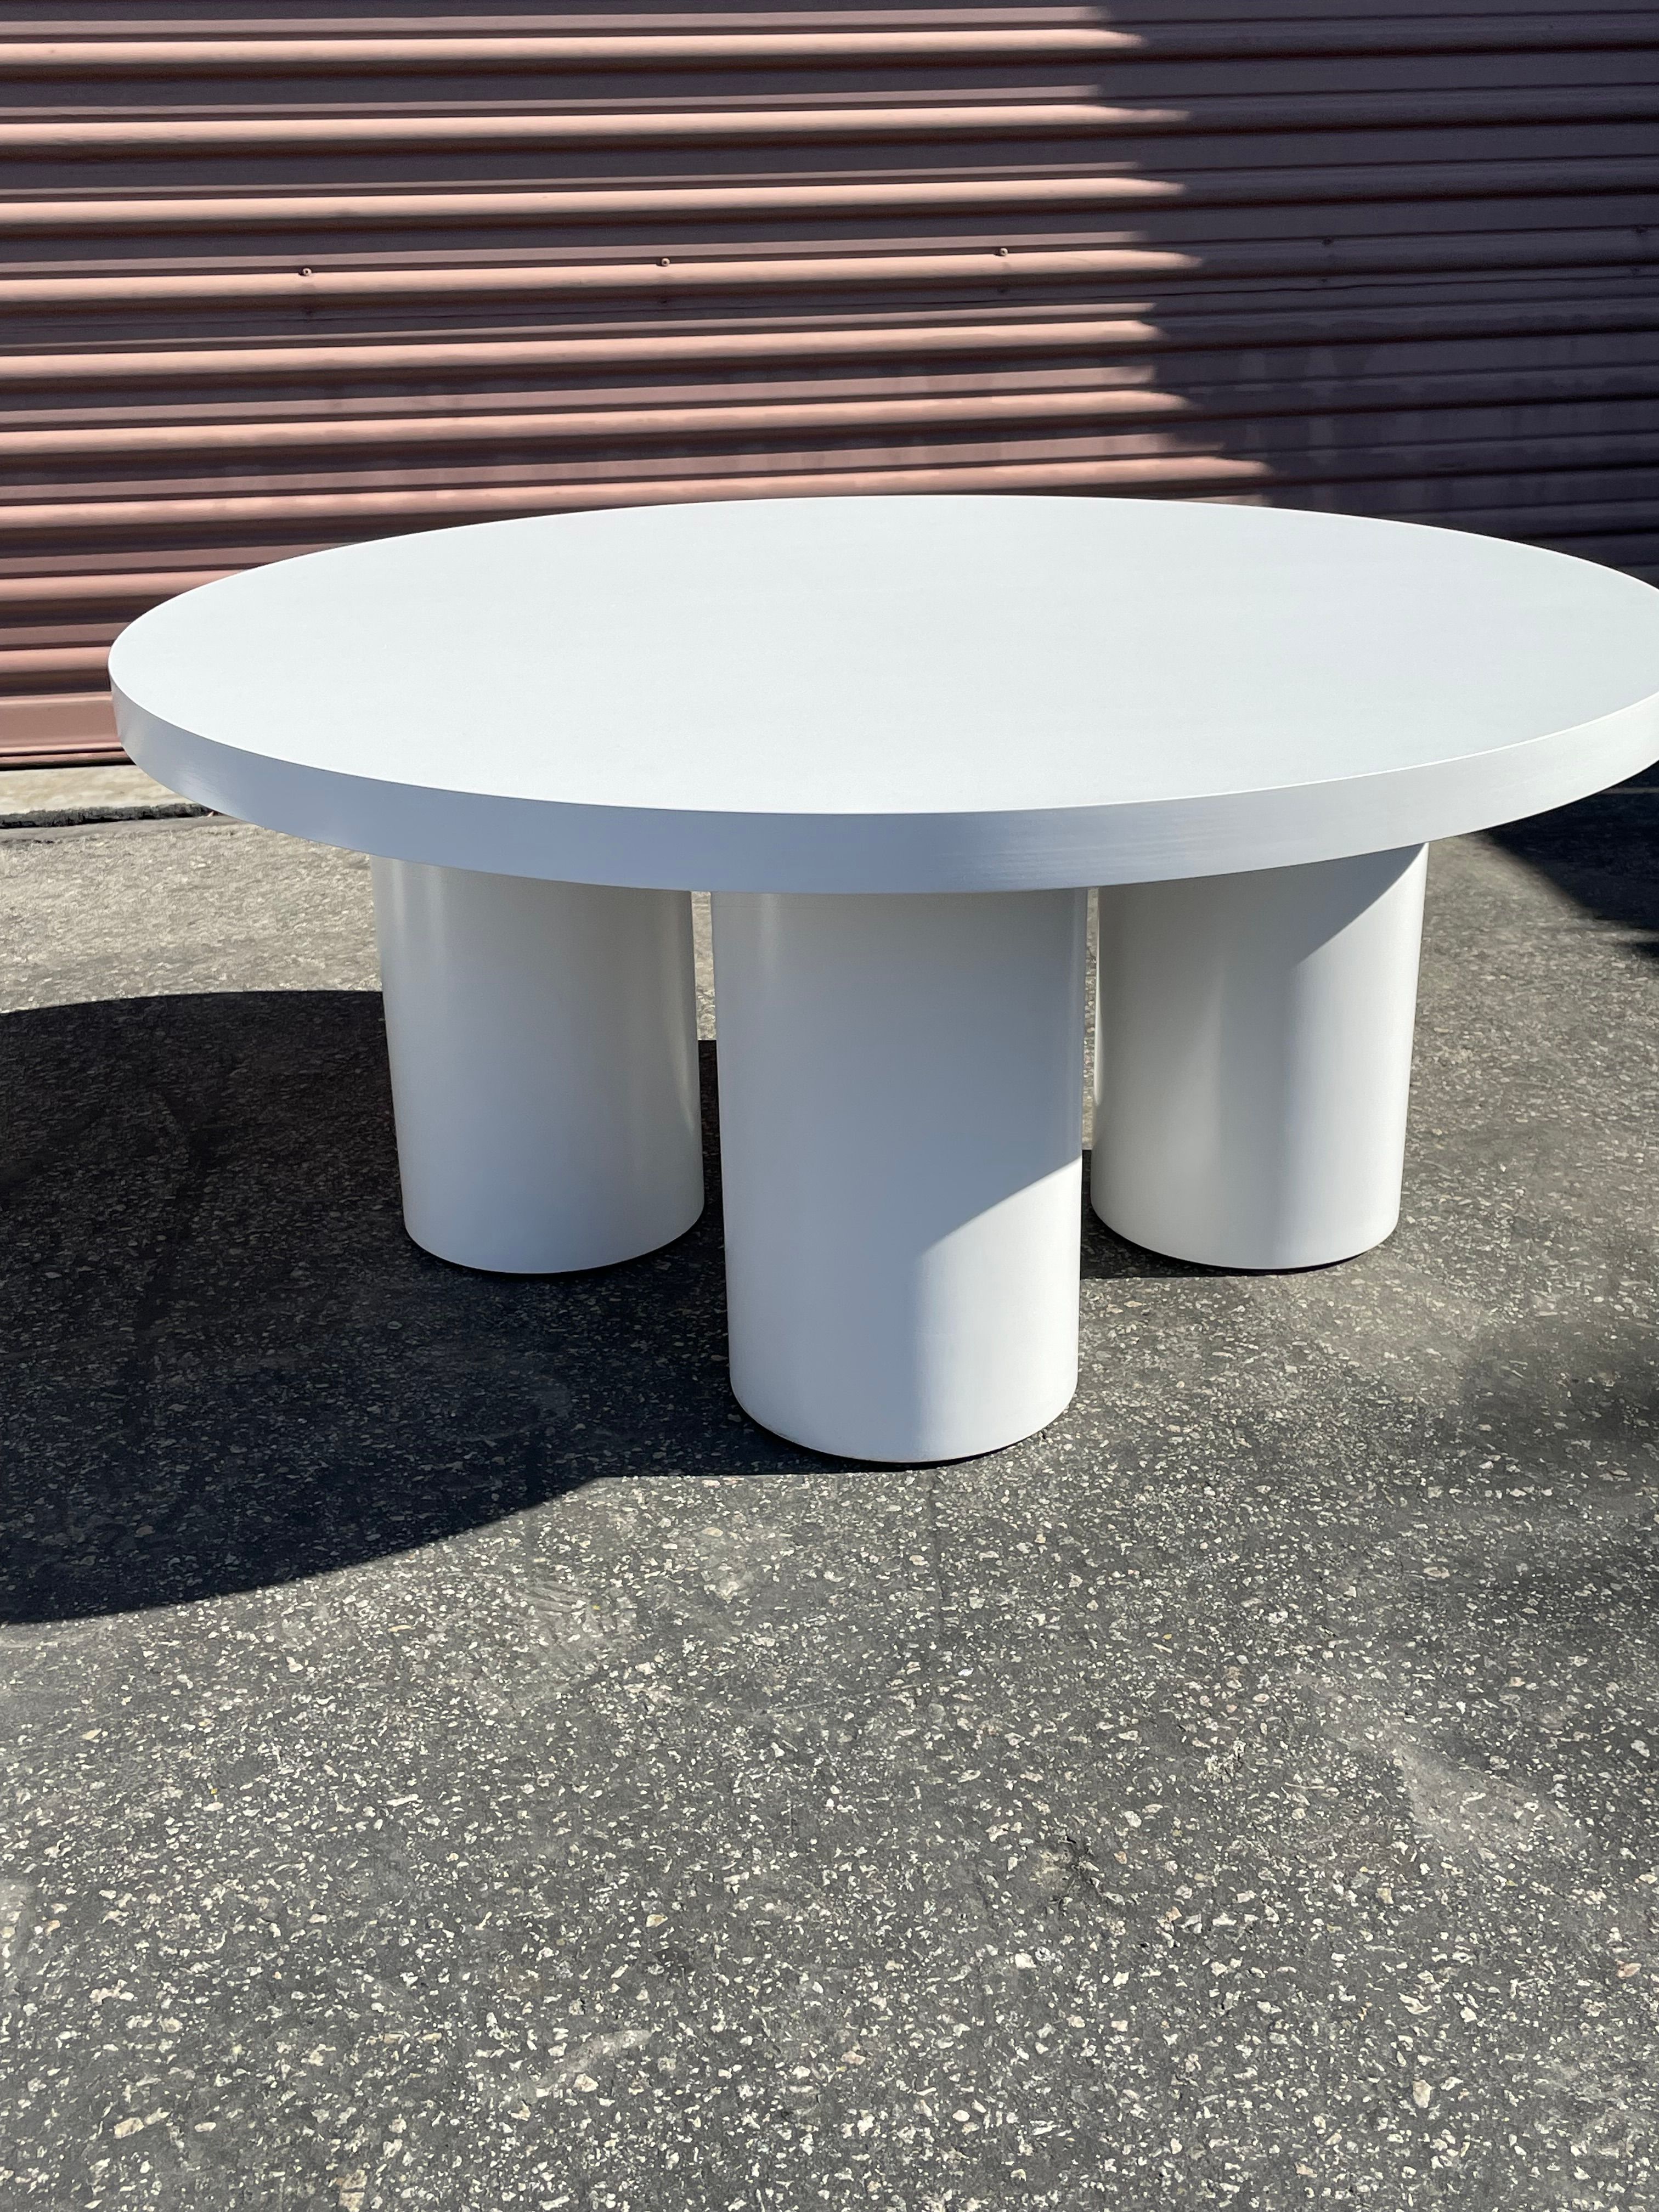  White Twin Coffee table Set - Folklor LA product image 2